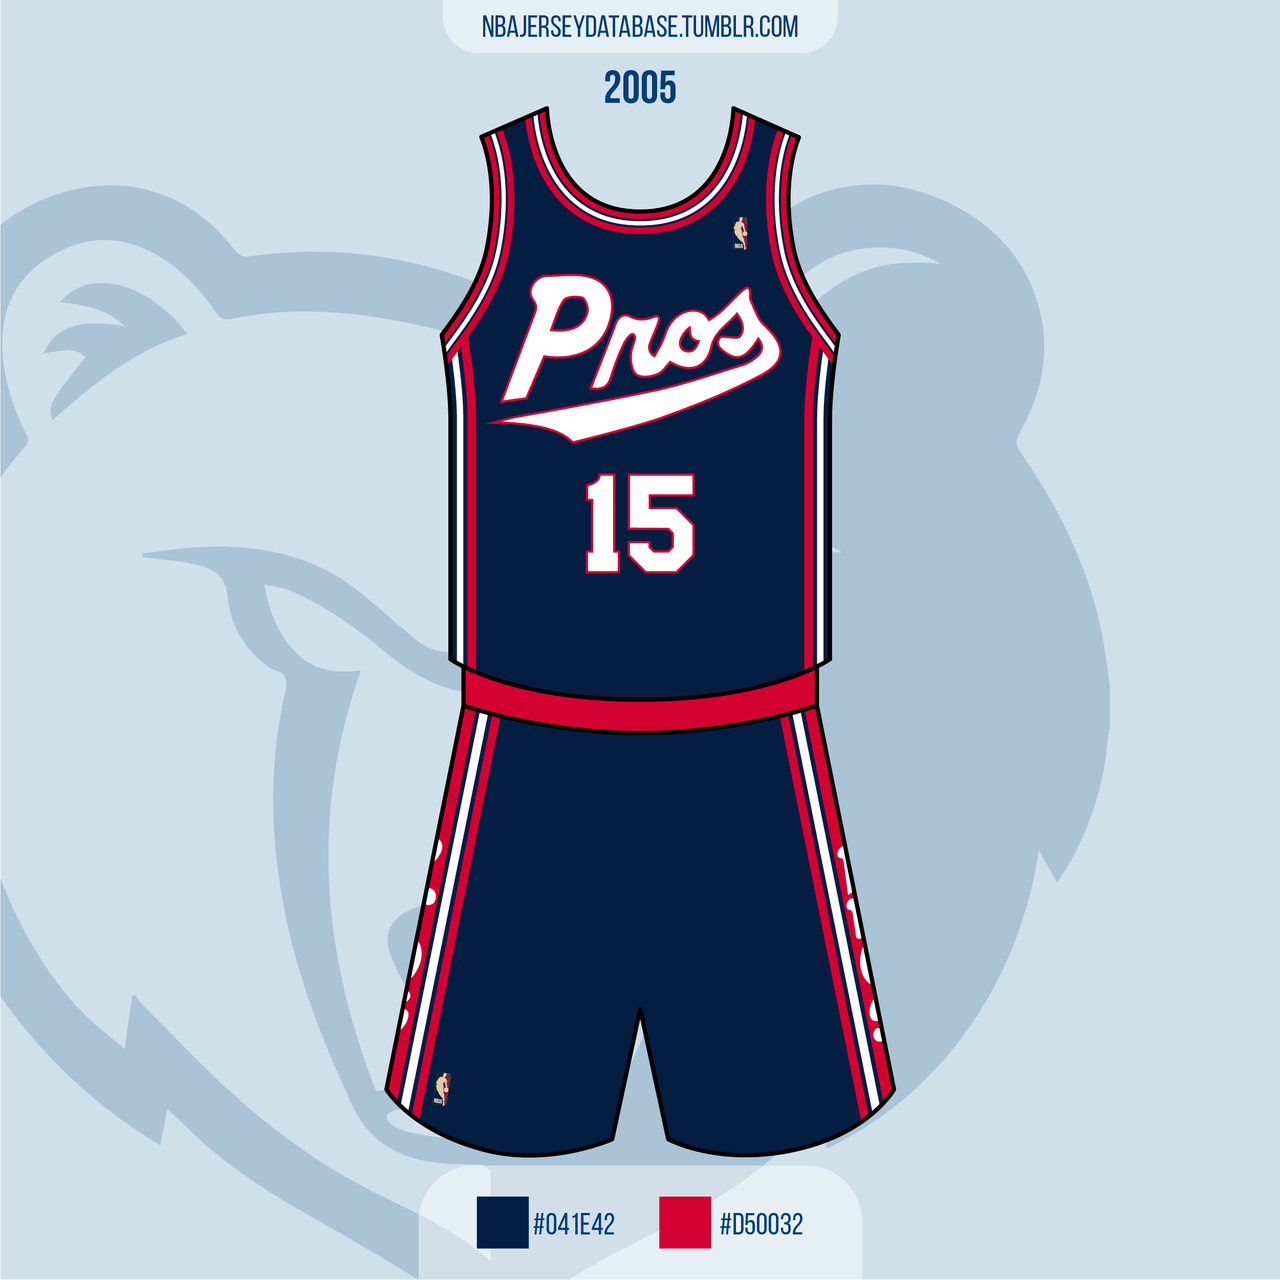 Grizzlies' new Hardwood Classic jerseys for this year : r/nba